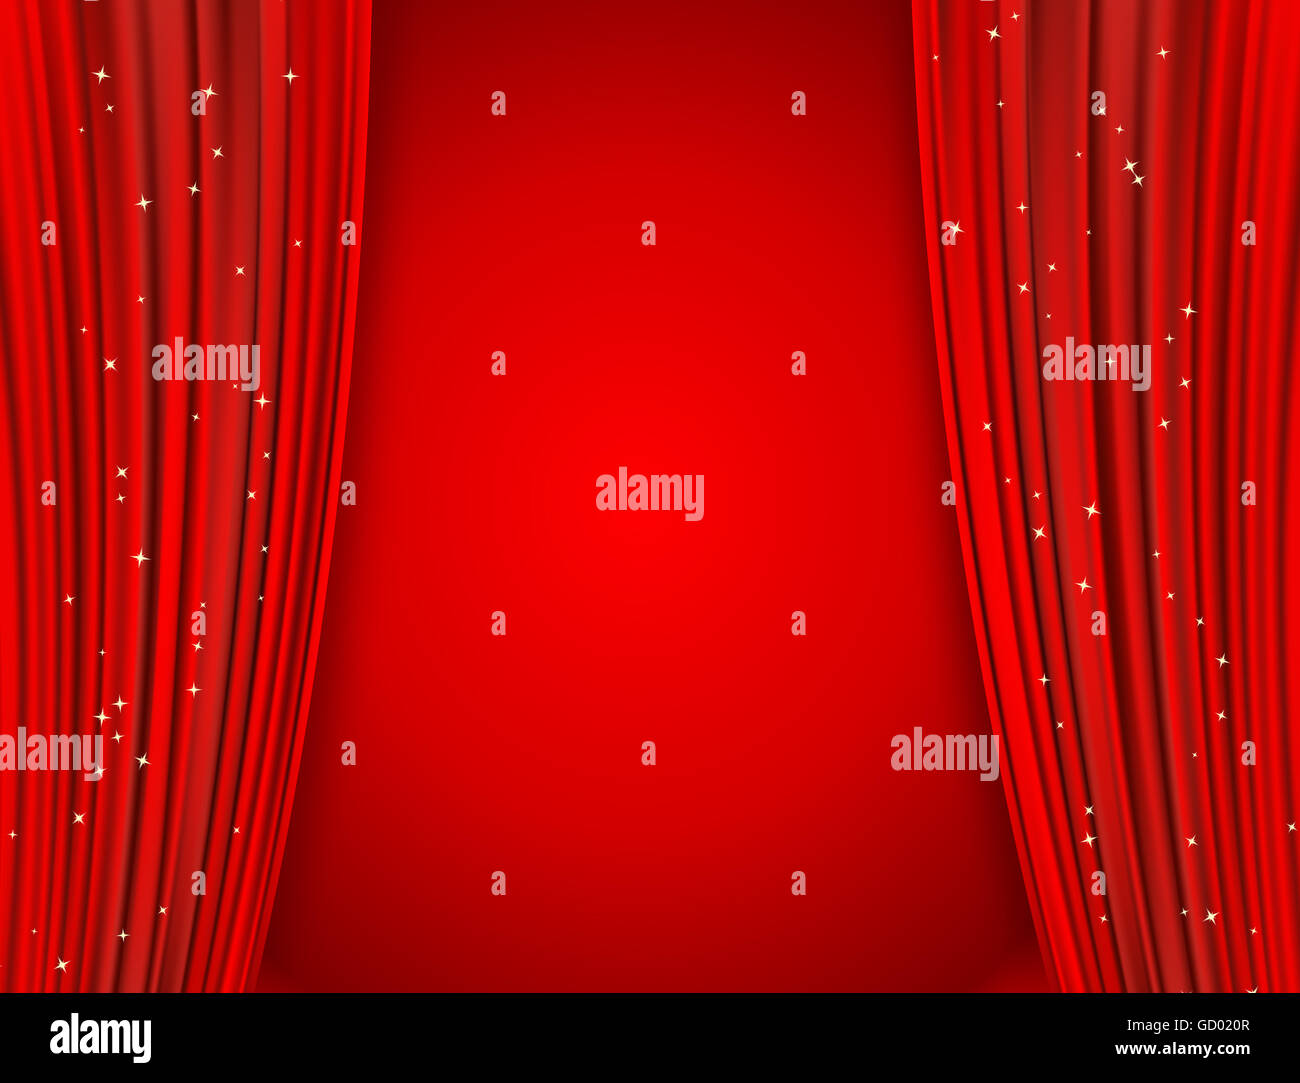 red curtains on red background with glittering stars. open curtains as movie presentation or cinema award announcement with spac Stock Photo